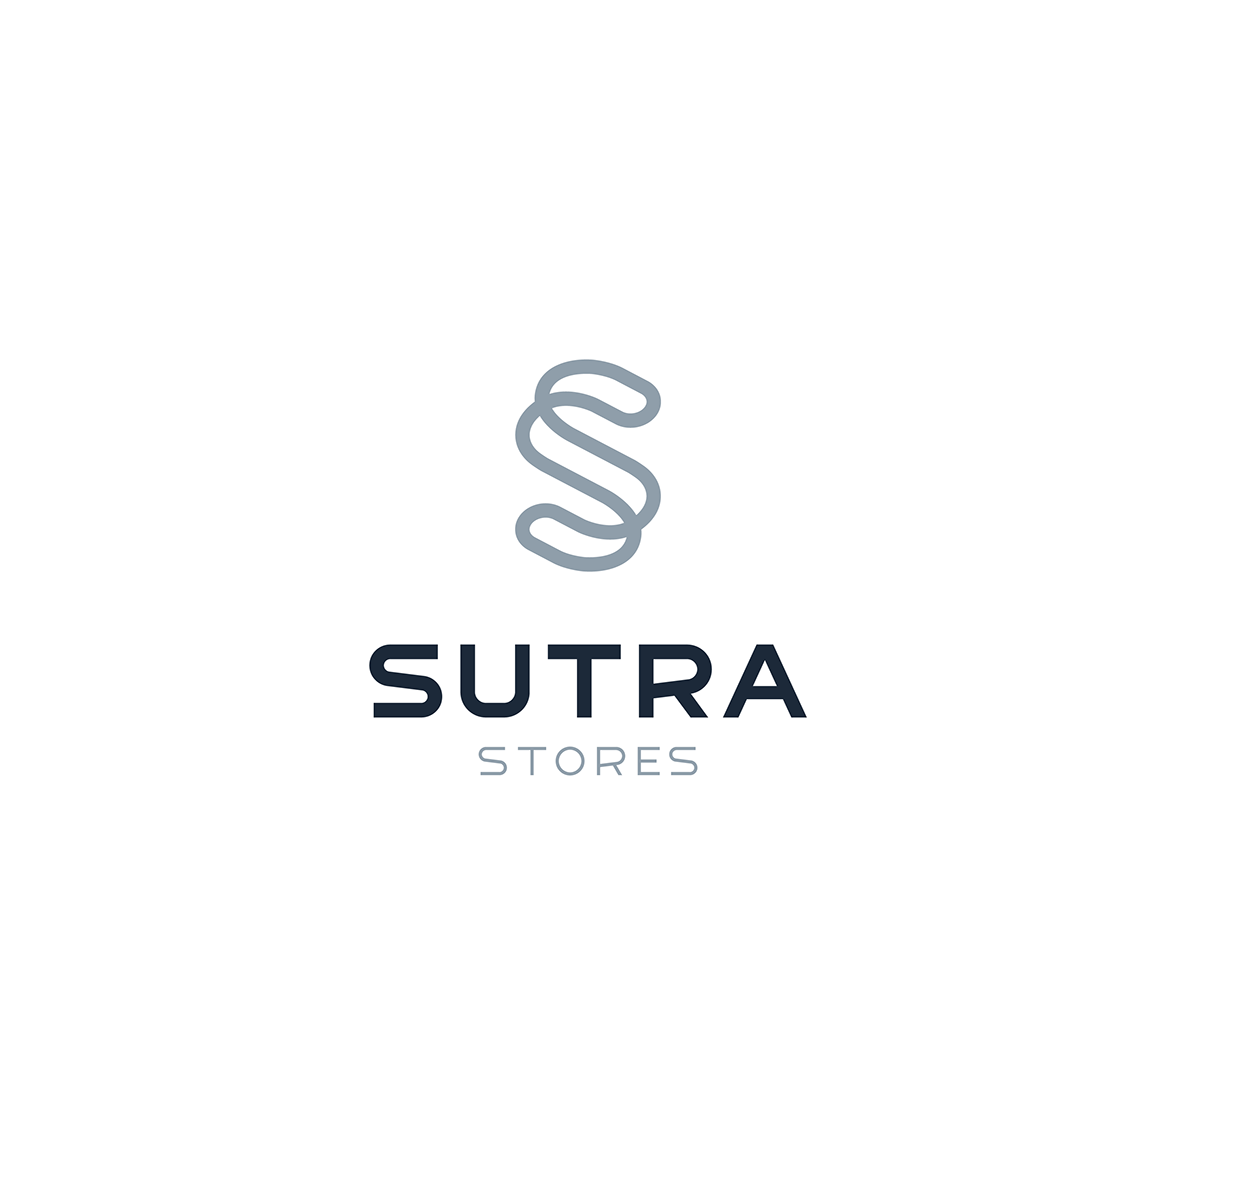 SUTRA